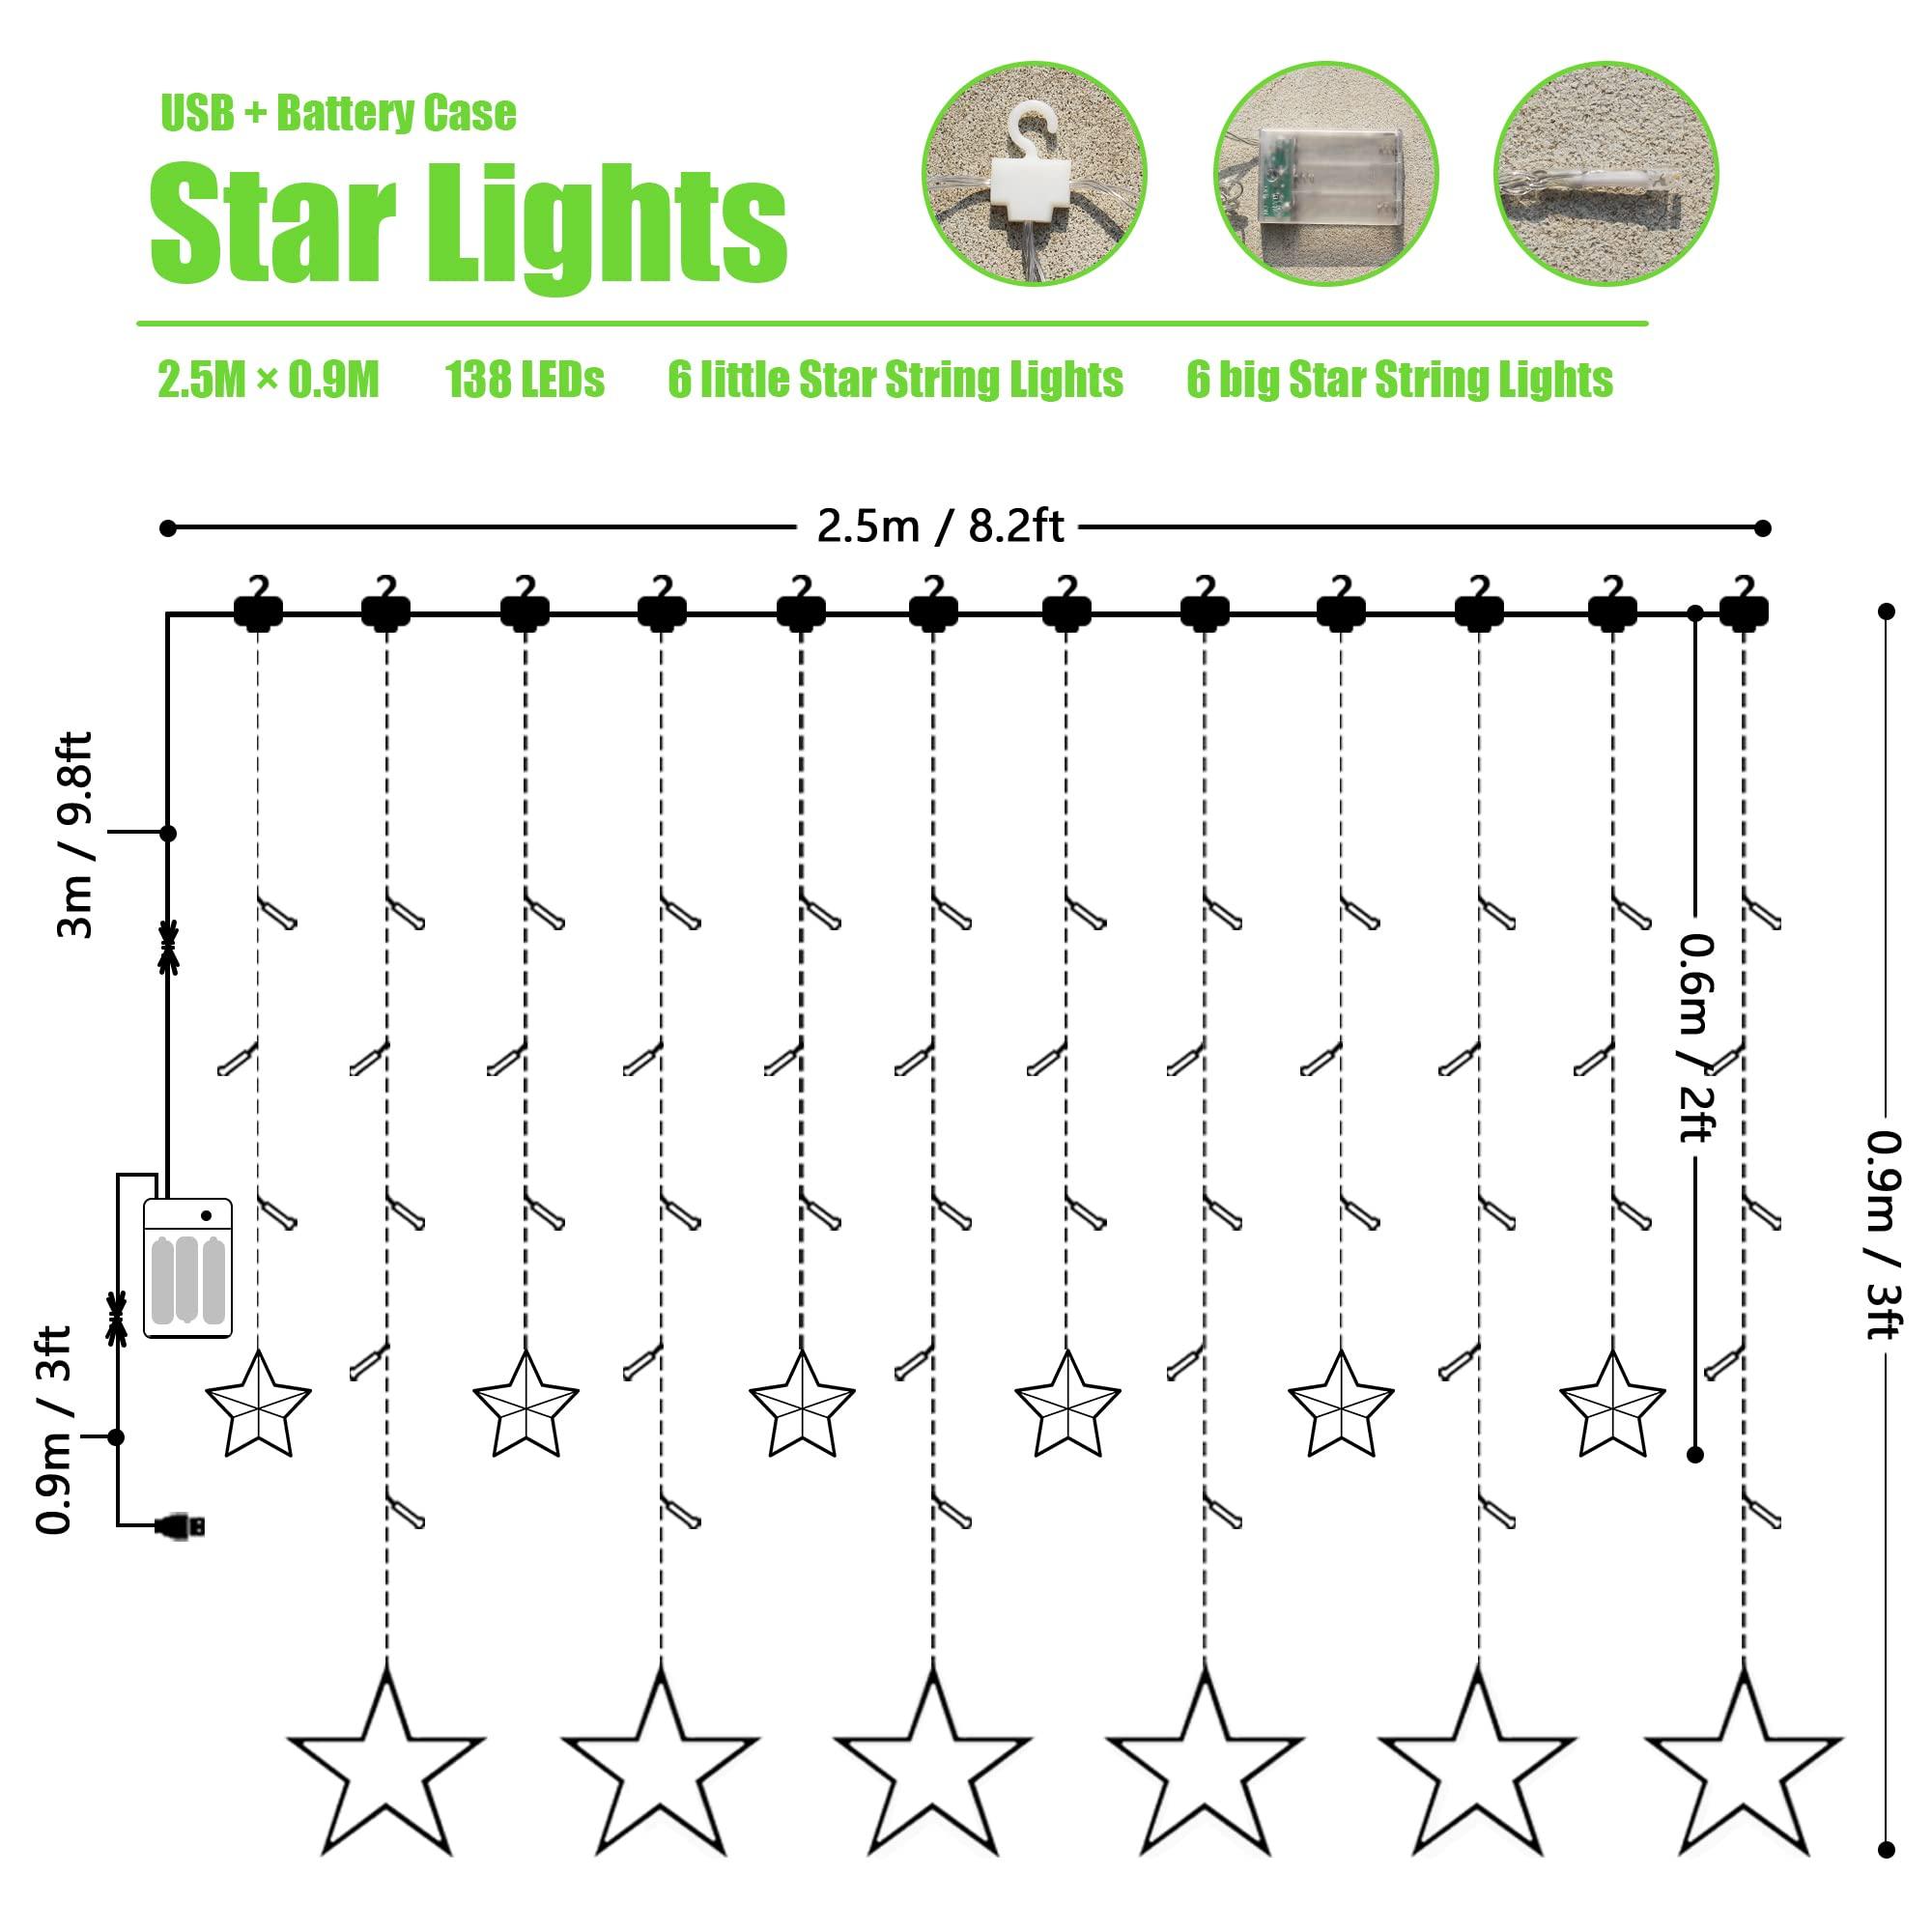 12 Star Curtain Lights with Remote Control 138 LEDs Fairy Light 8 Lighting Modes USB Powered for Bedroom Garden Party Wedding Christmas, Ideale Gift for Family Friends (Cold White) 4